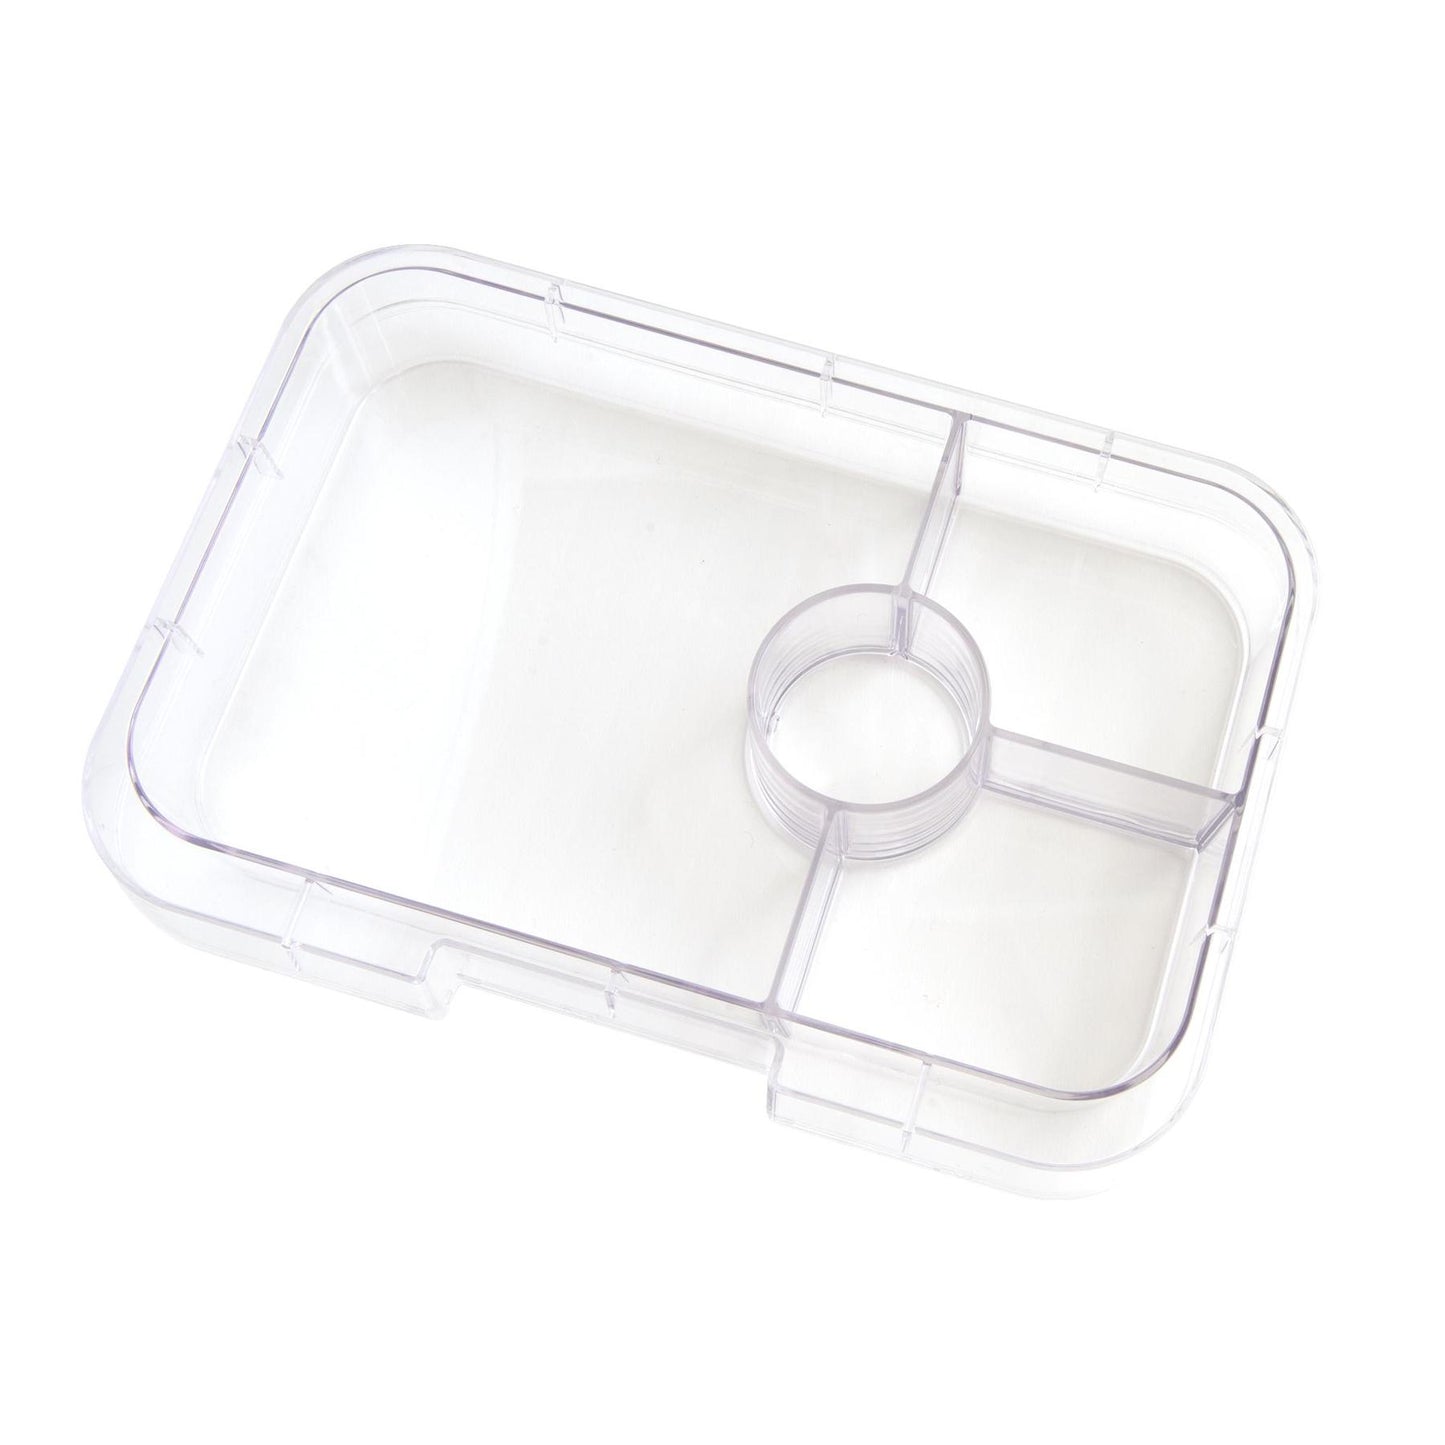 Yumbox Tapas Tray Insert - Clear 4 Compartment